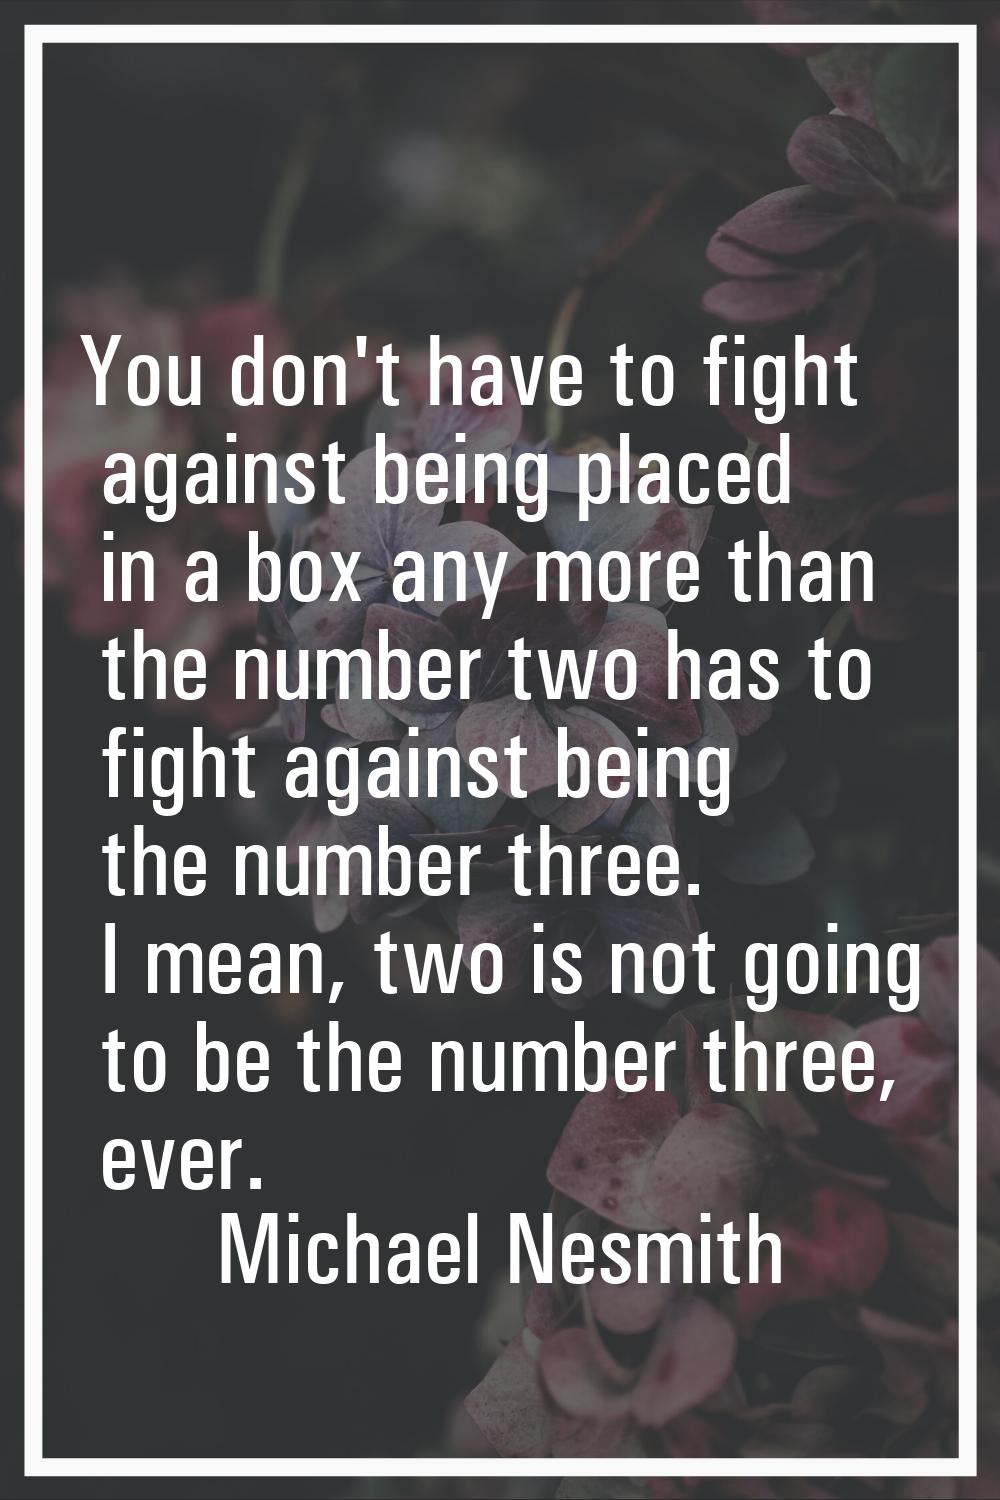 You don't have to fight against being placed in a box any more than the number two has to fight aga